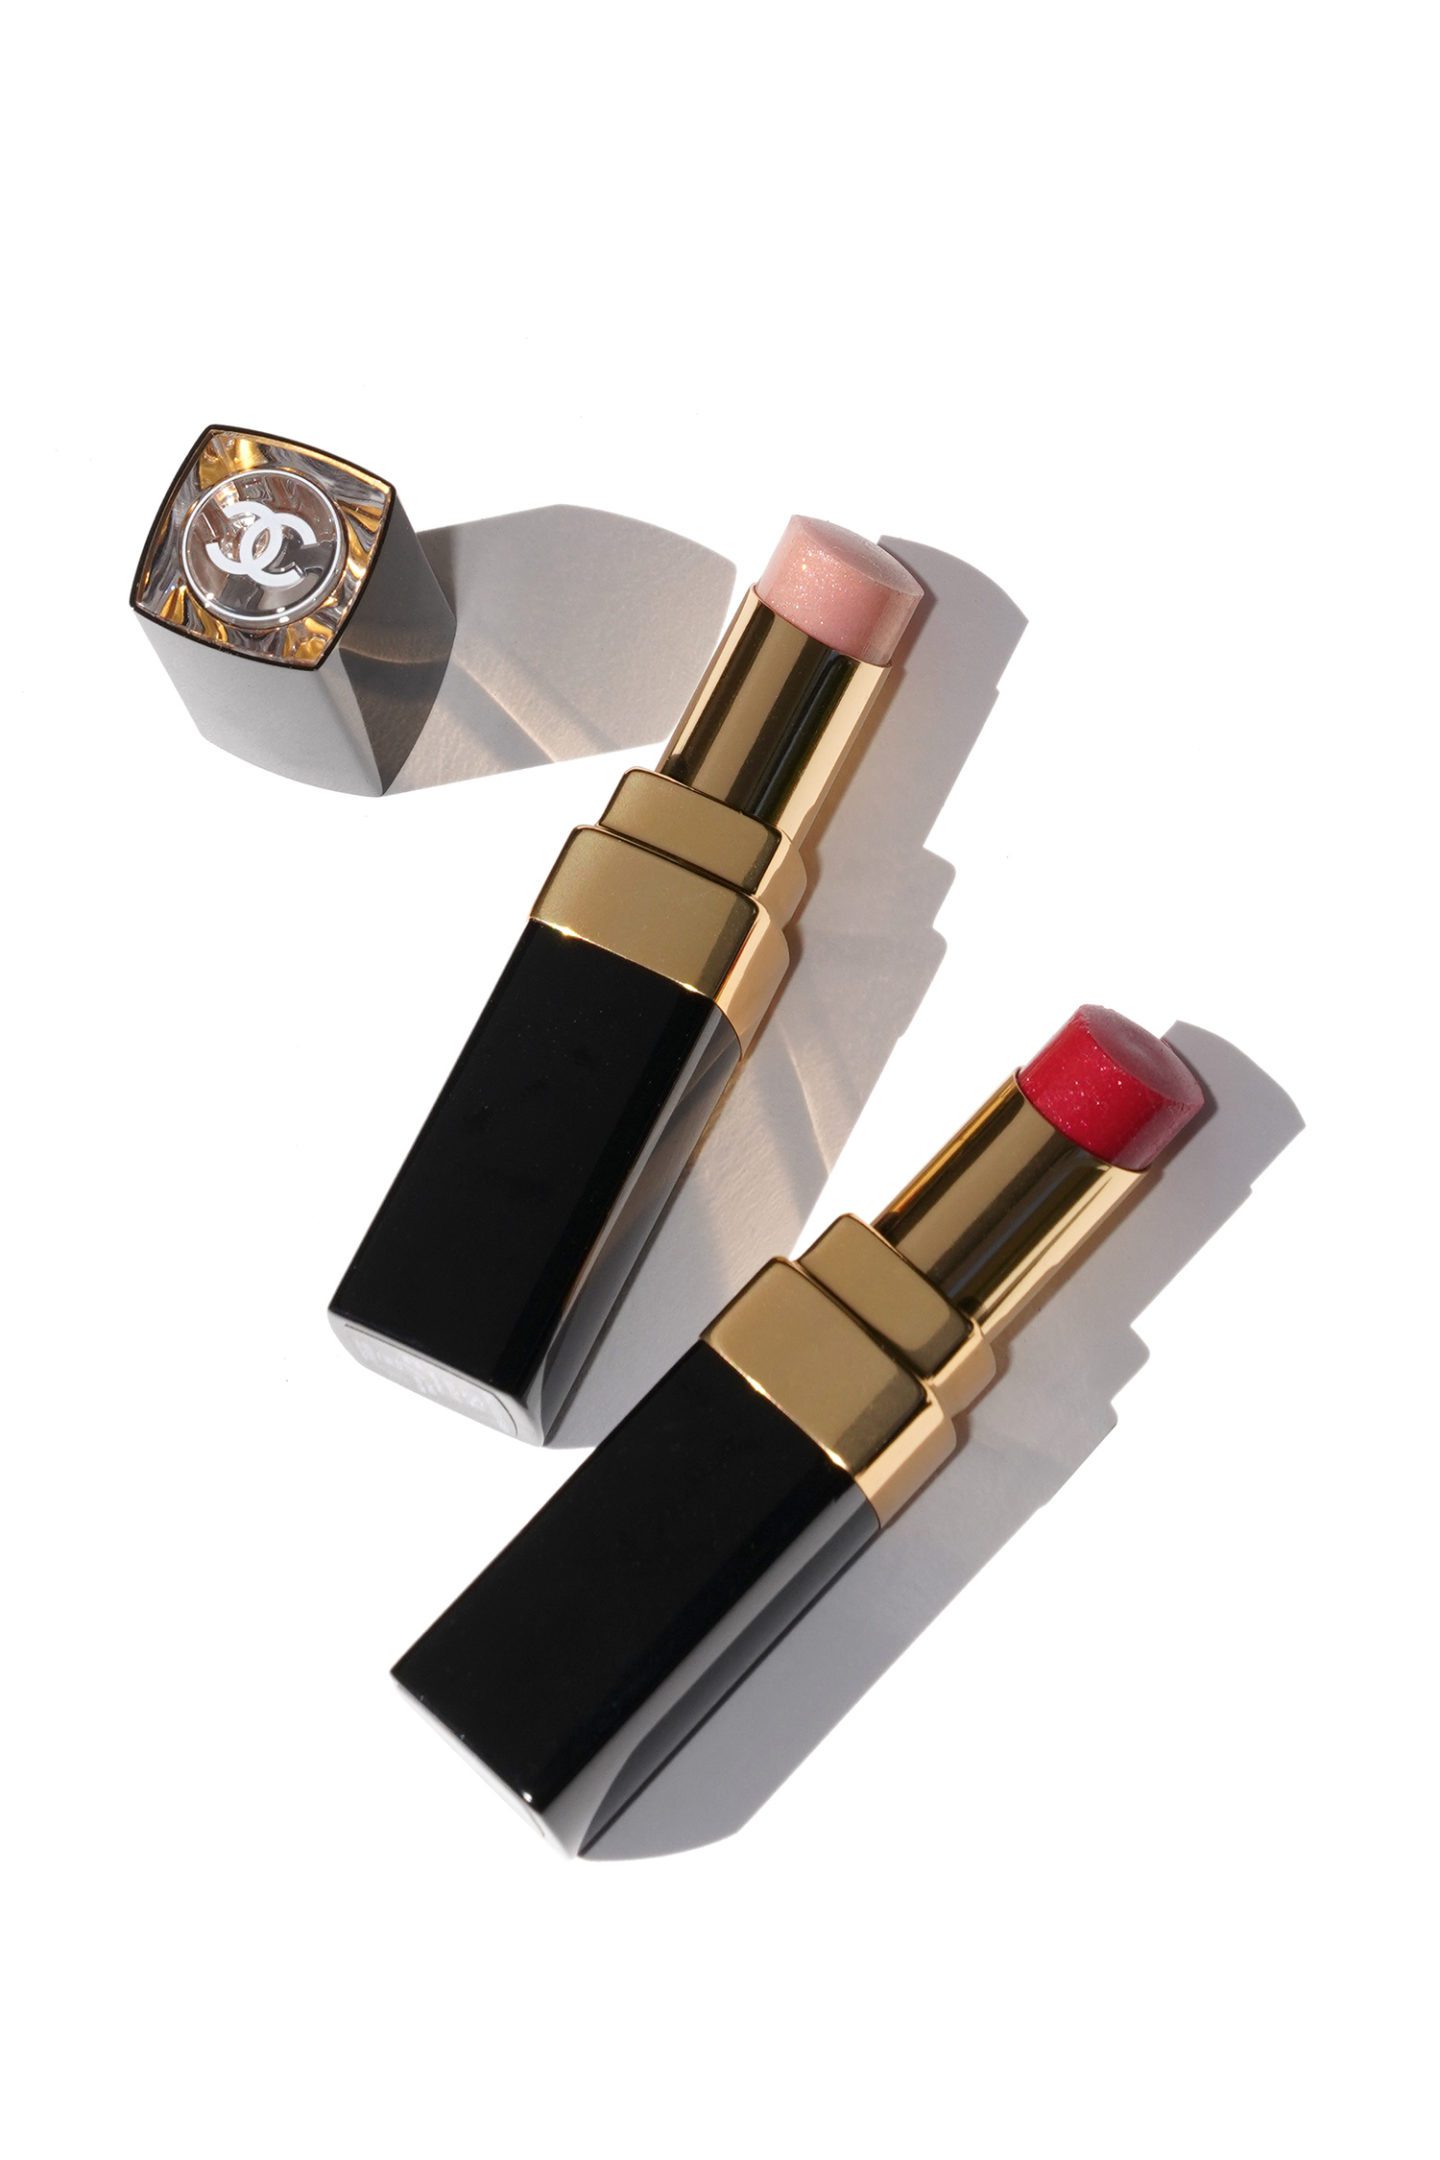 Chanel Rouge Coco Flash in Douceur 154 and Delicatesse 156